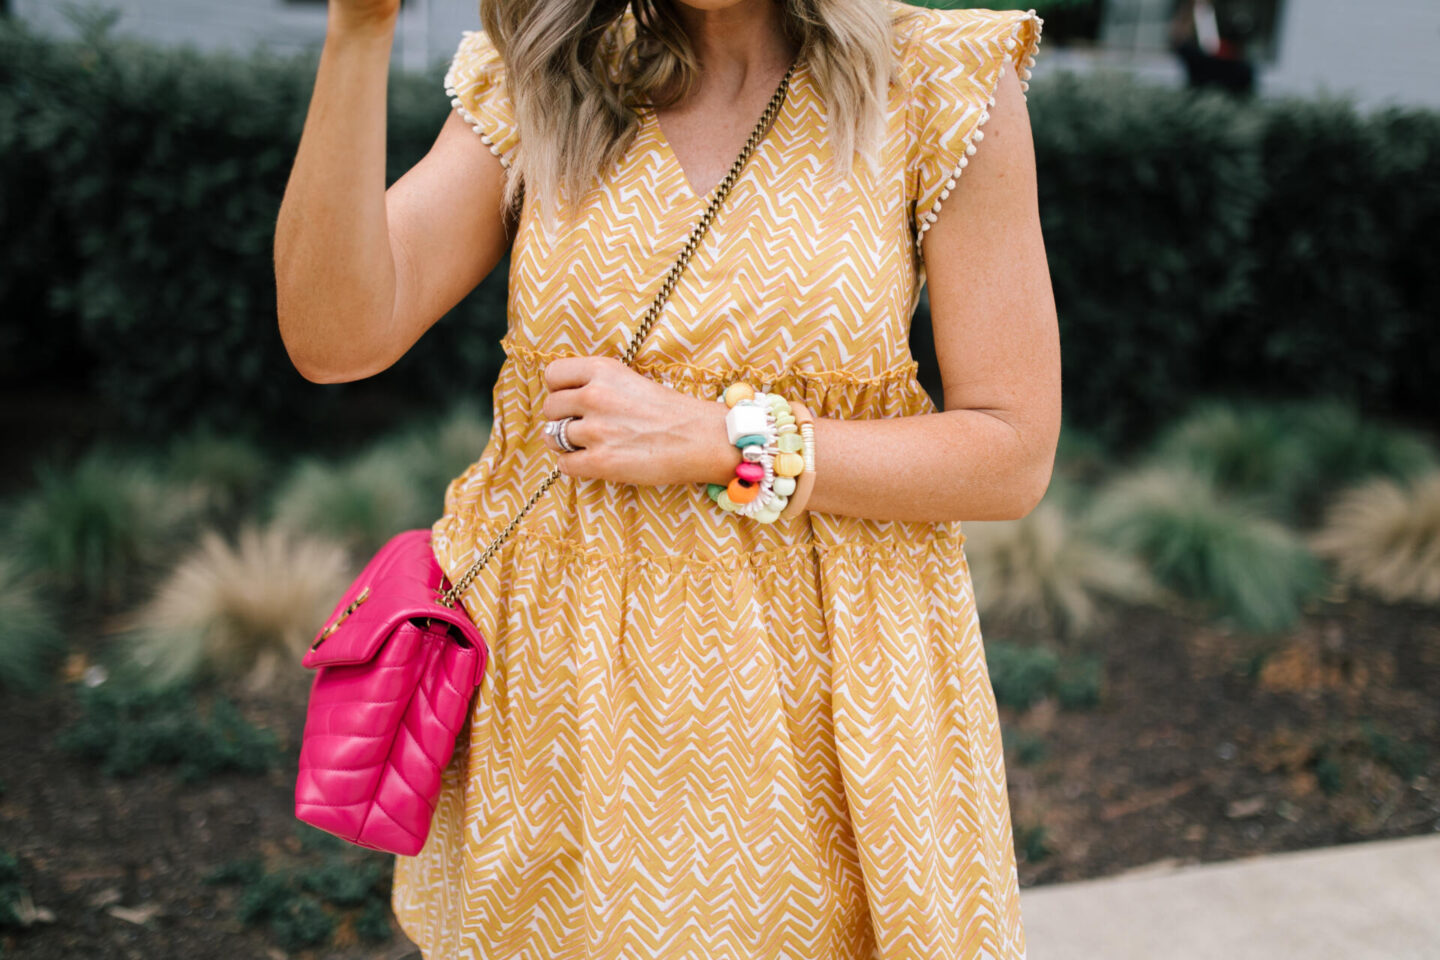 Summer Dresses by popular Nashville of Natasha Stoneking wearing a abstract flutter sleeve dress and carrying a YSL pink bag. 